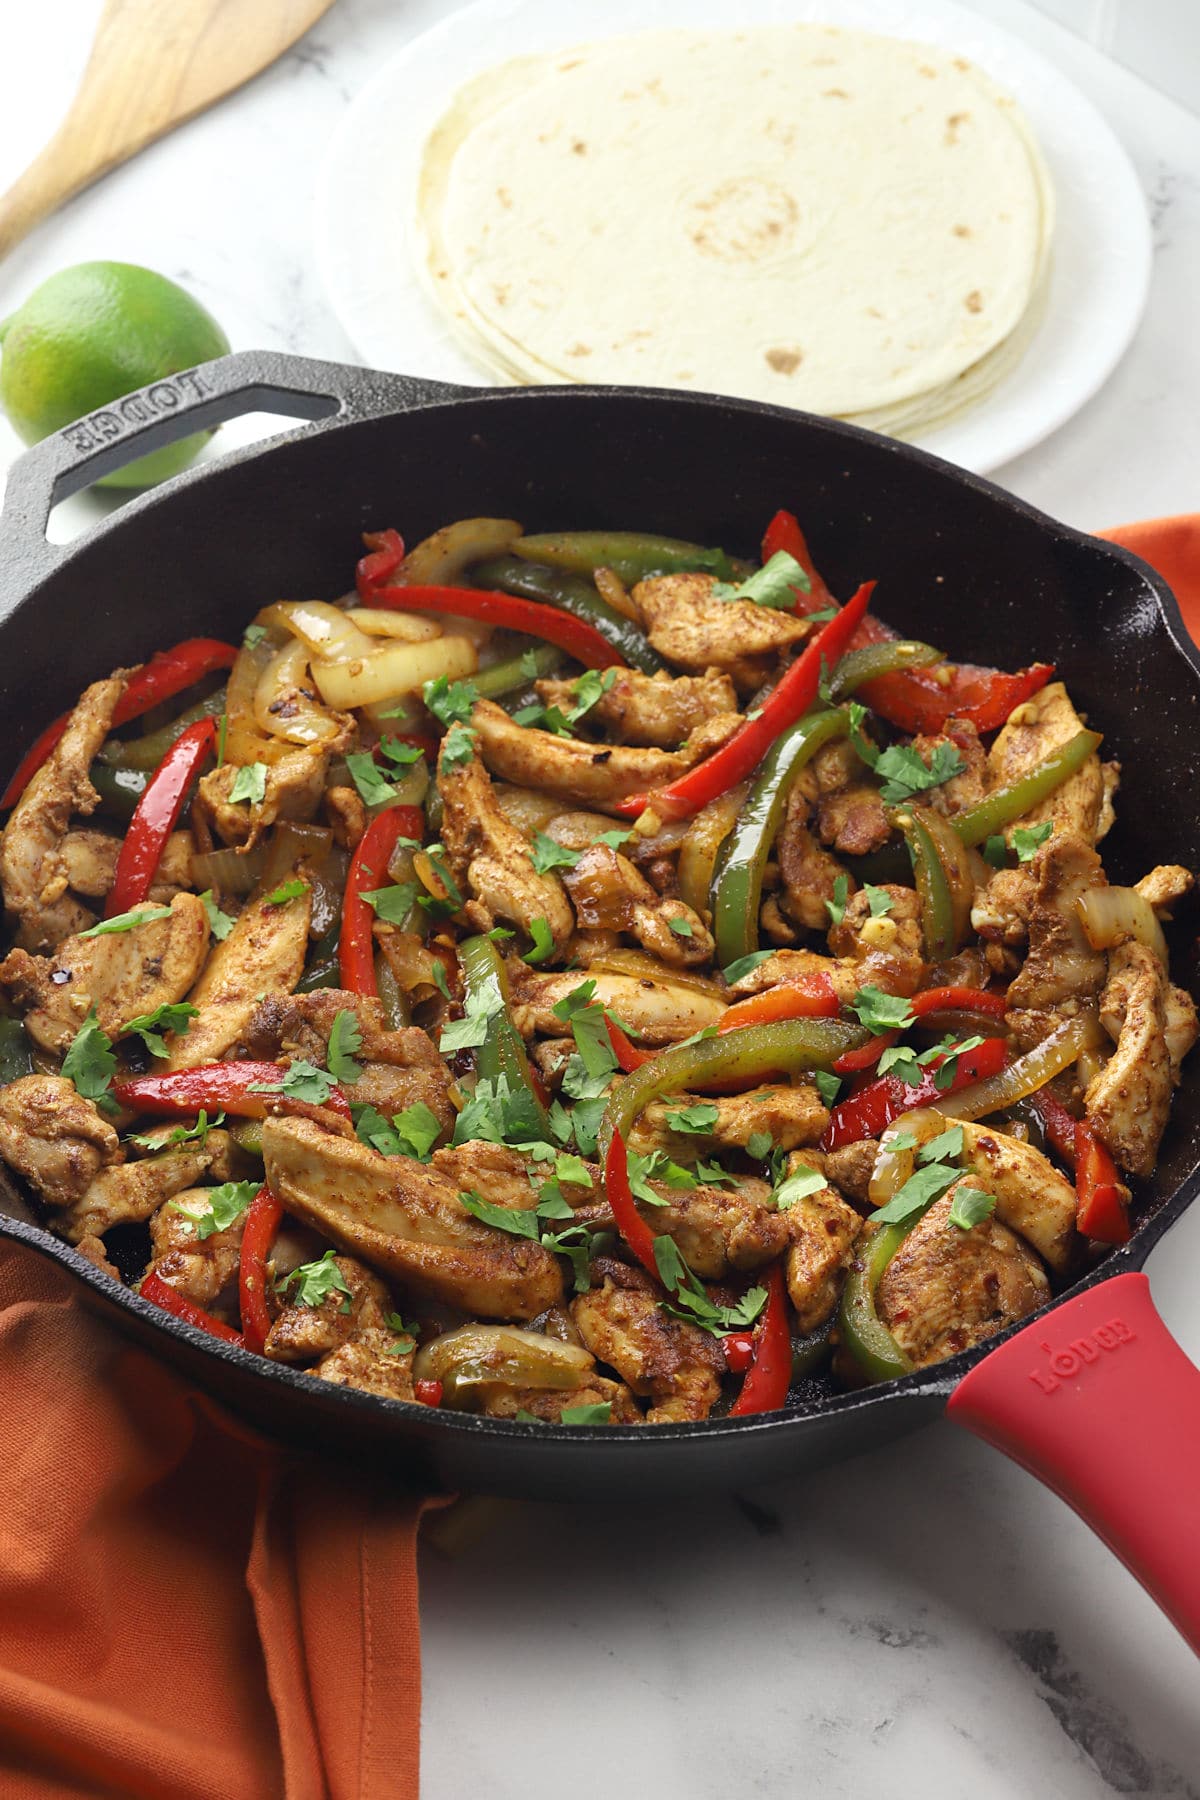 A cast iron skillet filled with cooked chicken fajitas, beside a plate of flour tortillas.